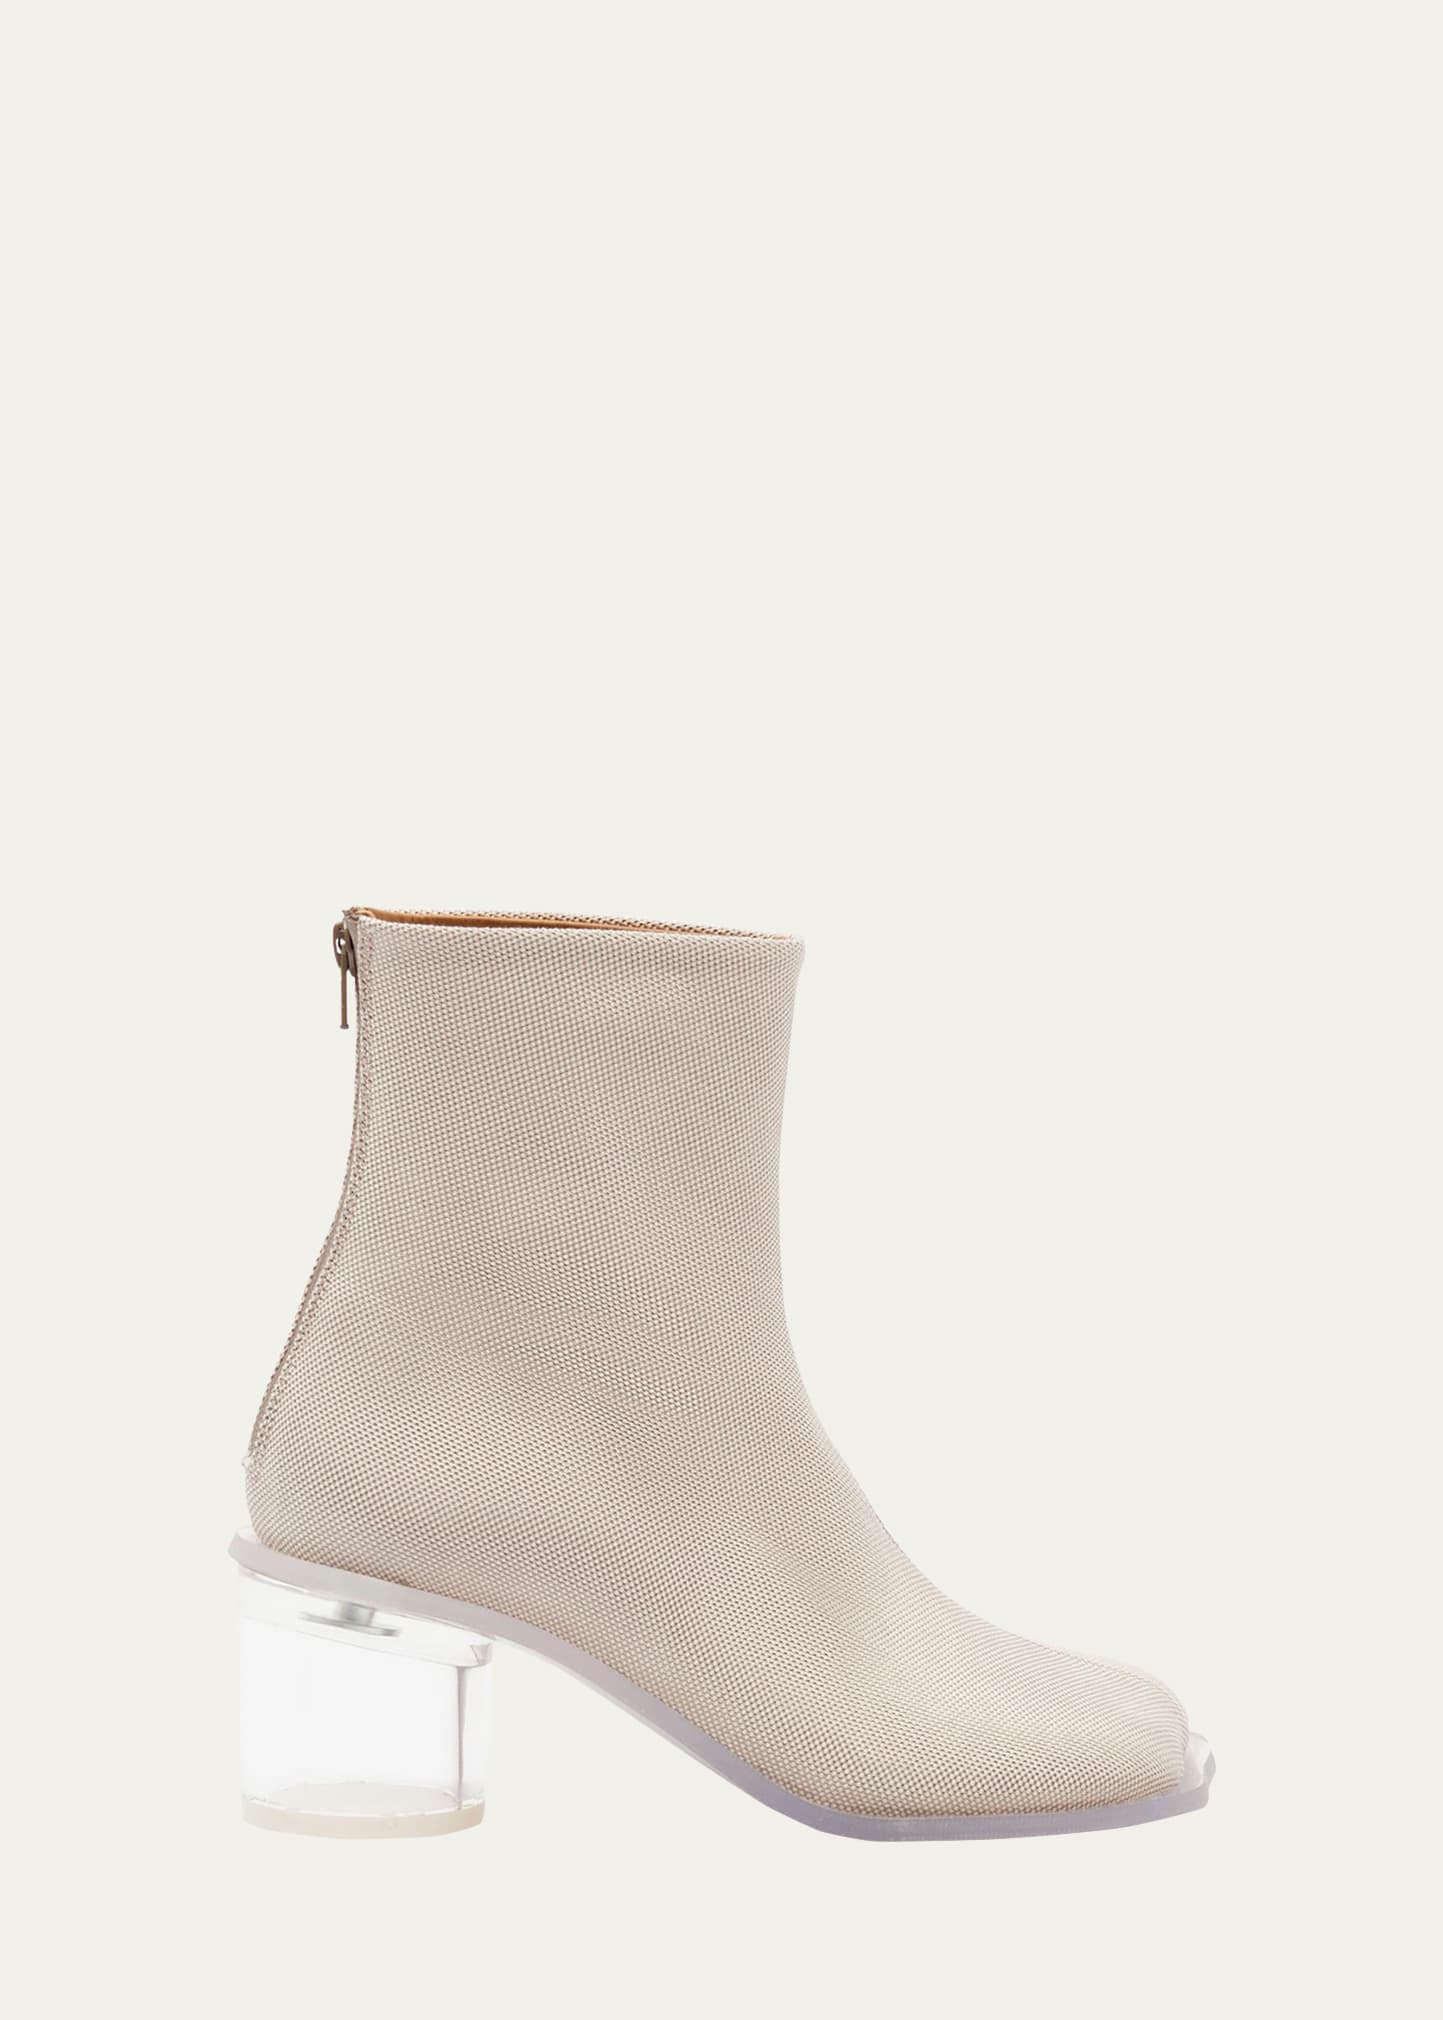 Anatomic Leather Clear-Heel Ankle Boots